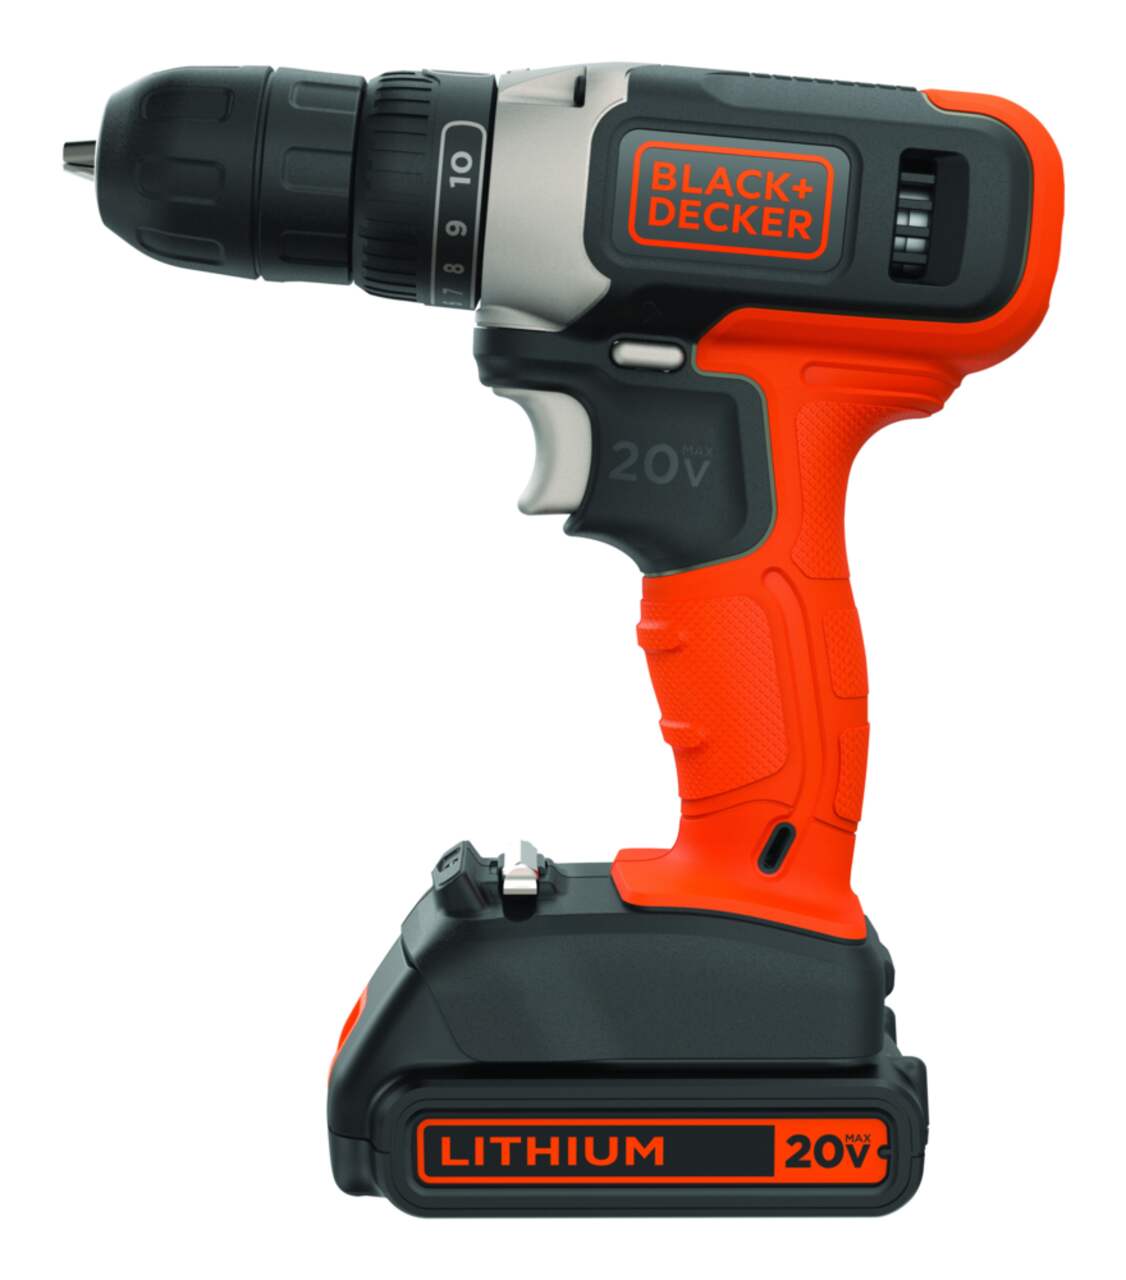 https://media-www.canadiantire.ca/product/fixing/tools/portable-power-tools/3994924/black-and-decker-20v-max-cordless-drill-driver-c1cd25df-49da-4be7-bc0b-f7f82fdfa959.png?imdensity=1&imwidth=1244&impolicy=mZoom